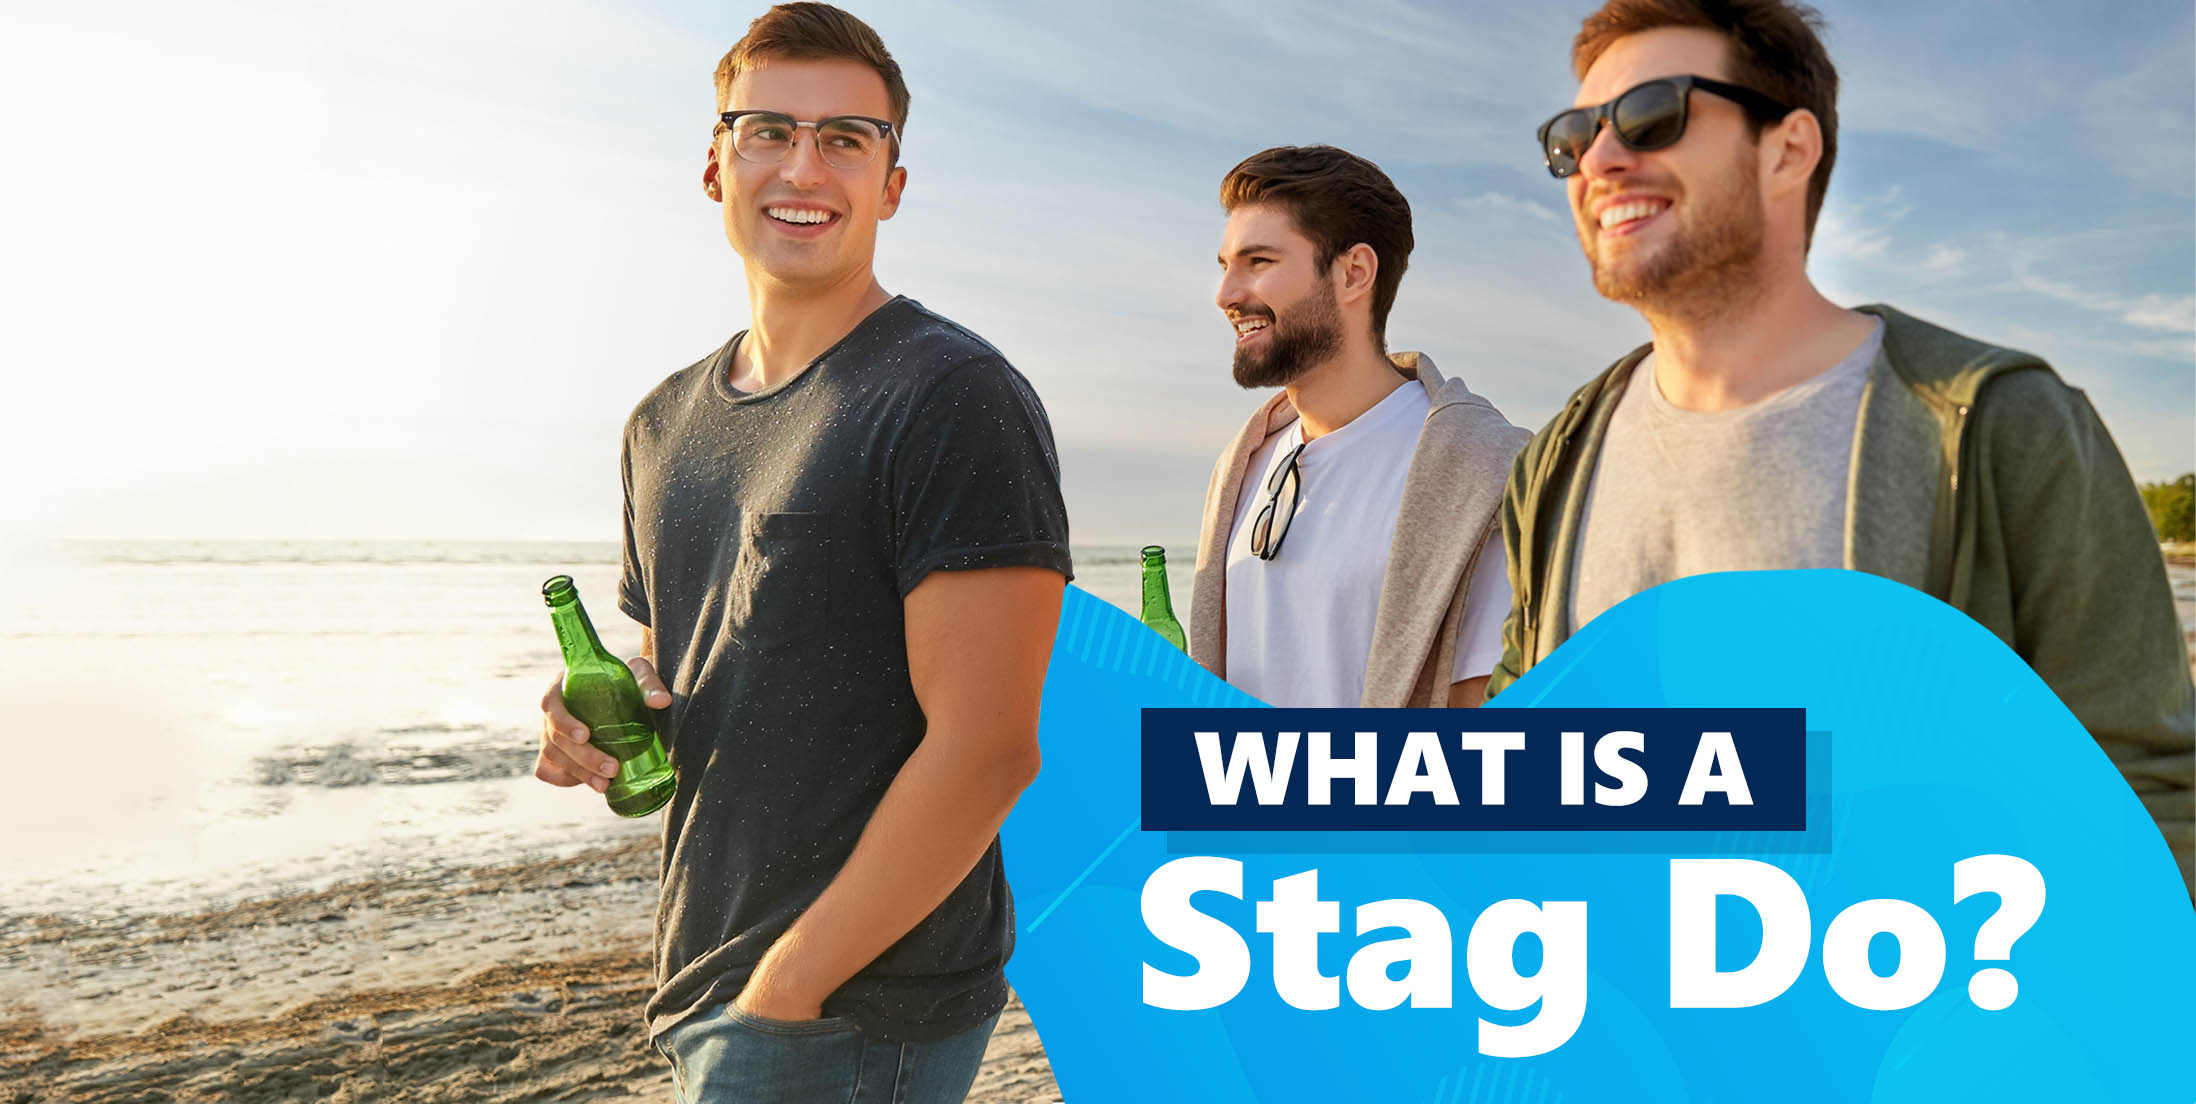 What is a Stag Do?